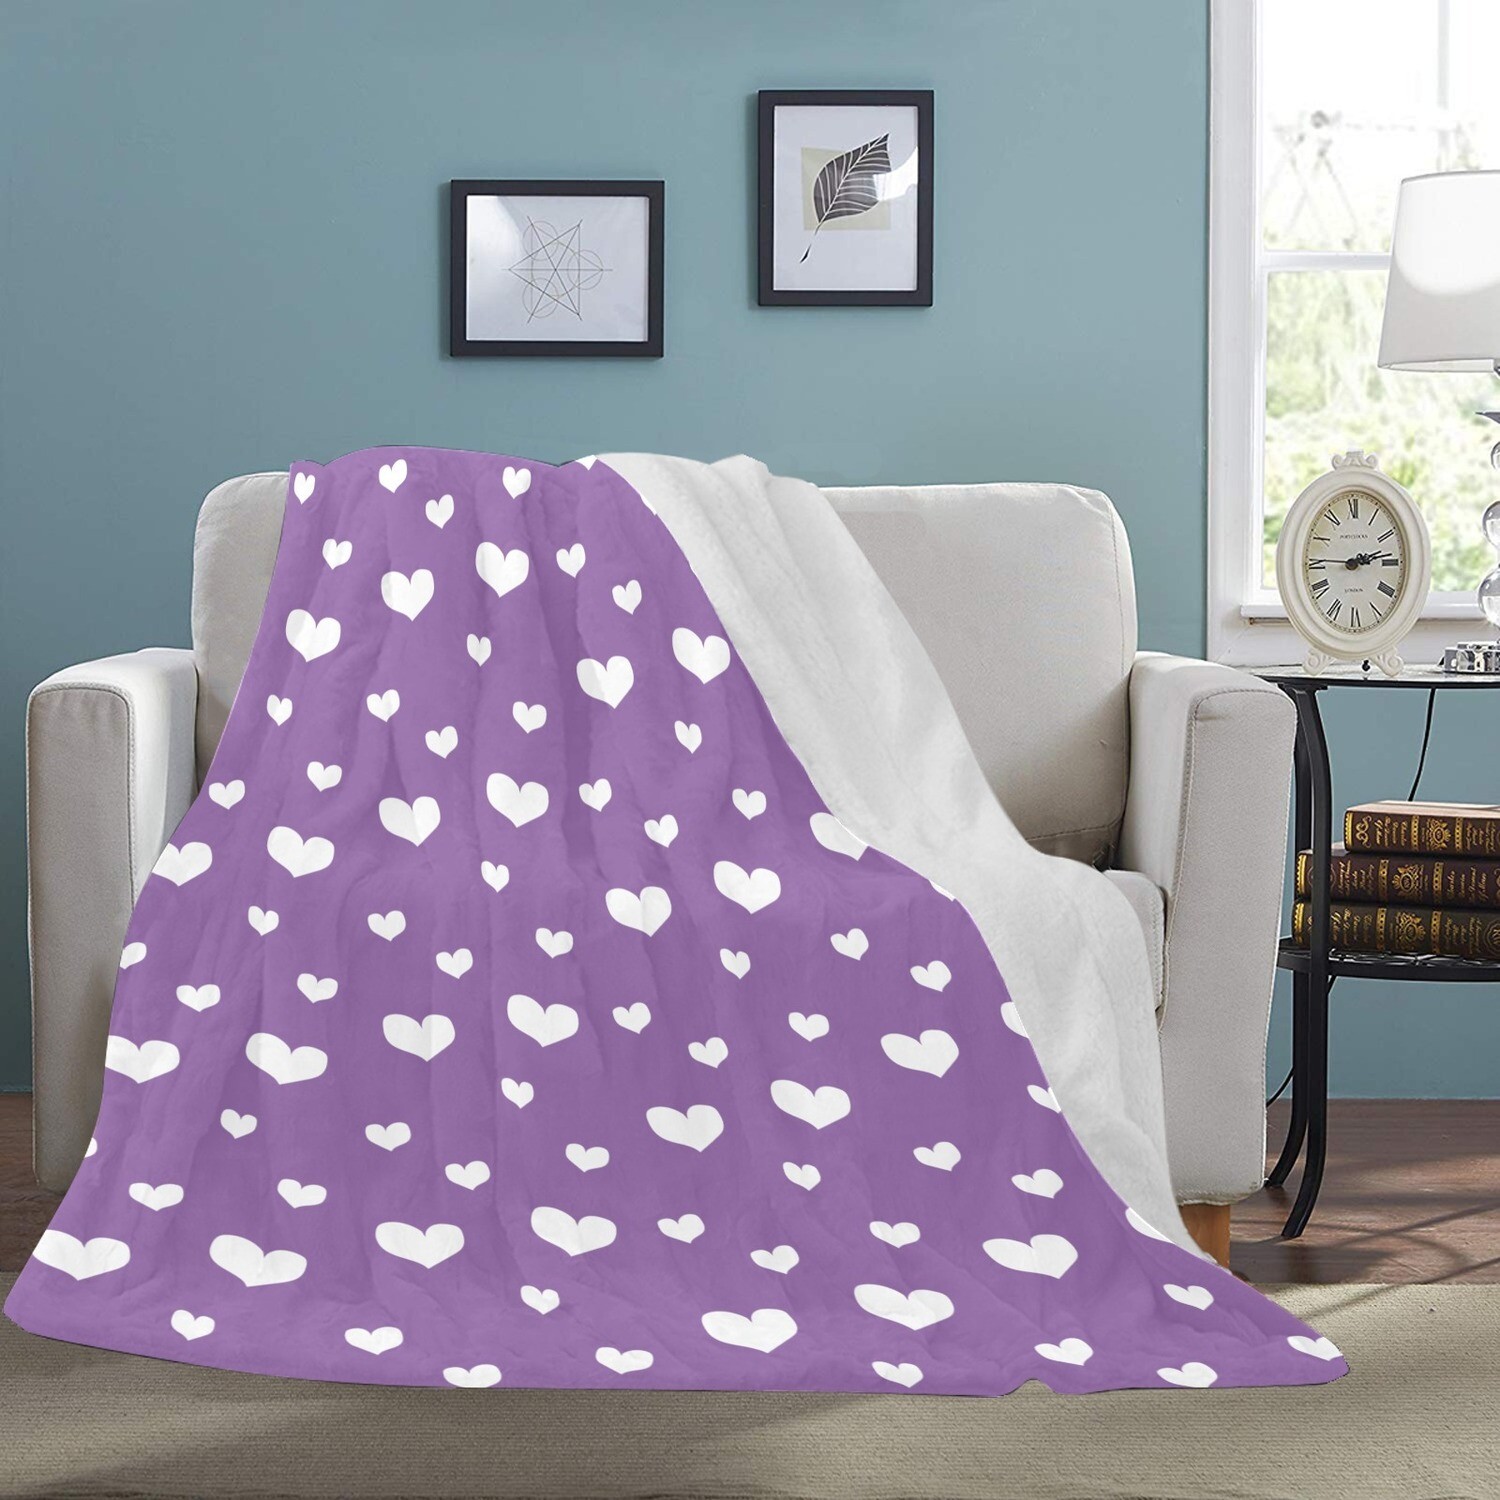 🤴🏽👸🏽💕Large Ultra-Soft Micro Fleece Blanket Valentine white hearts on amethyst orchid purple, gift, gift for her, gift for him, gift for them, 70"x80"